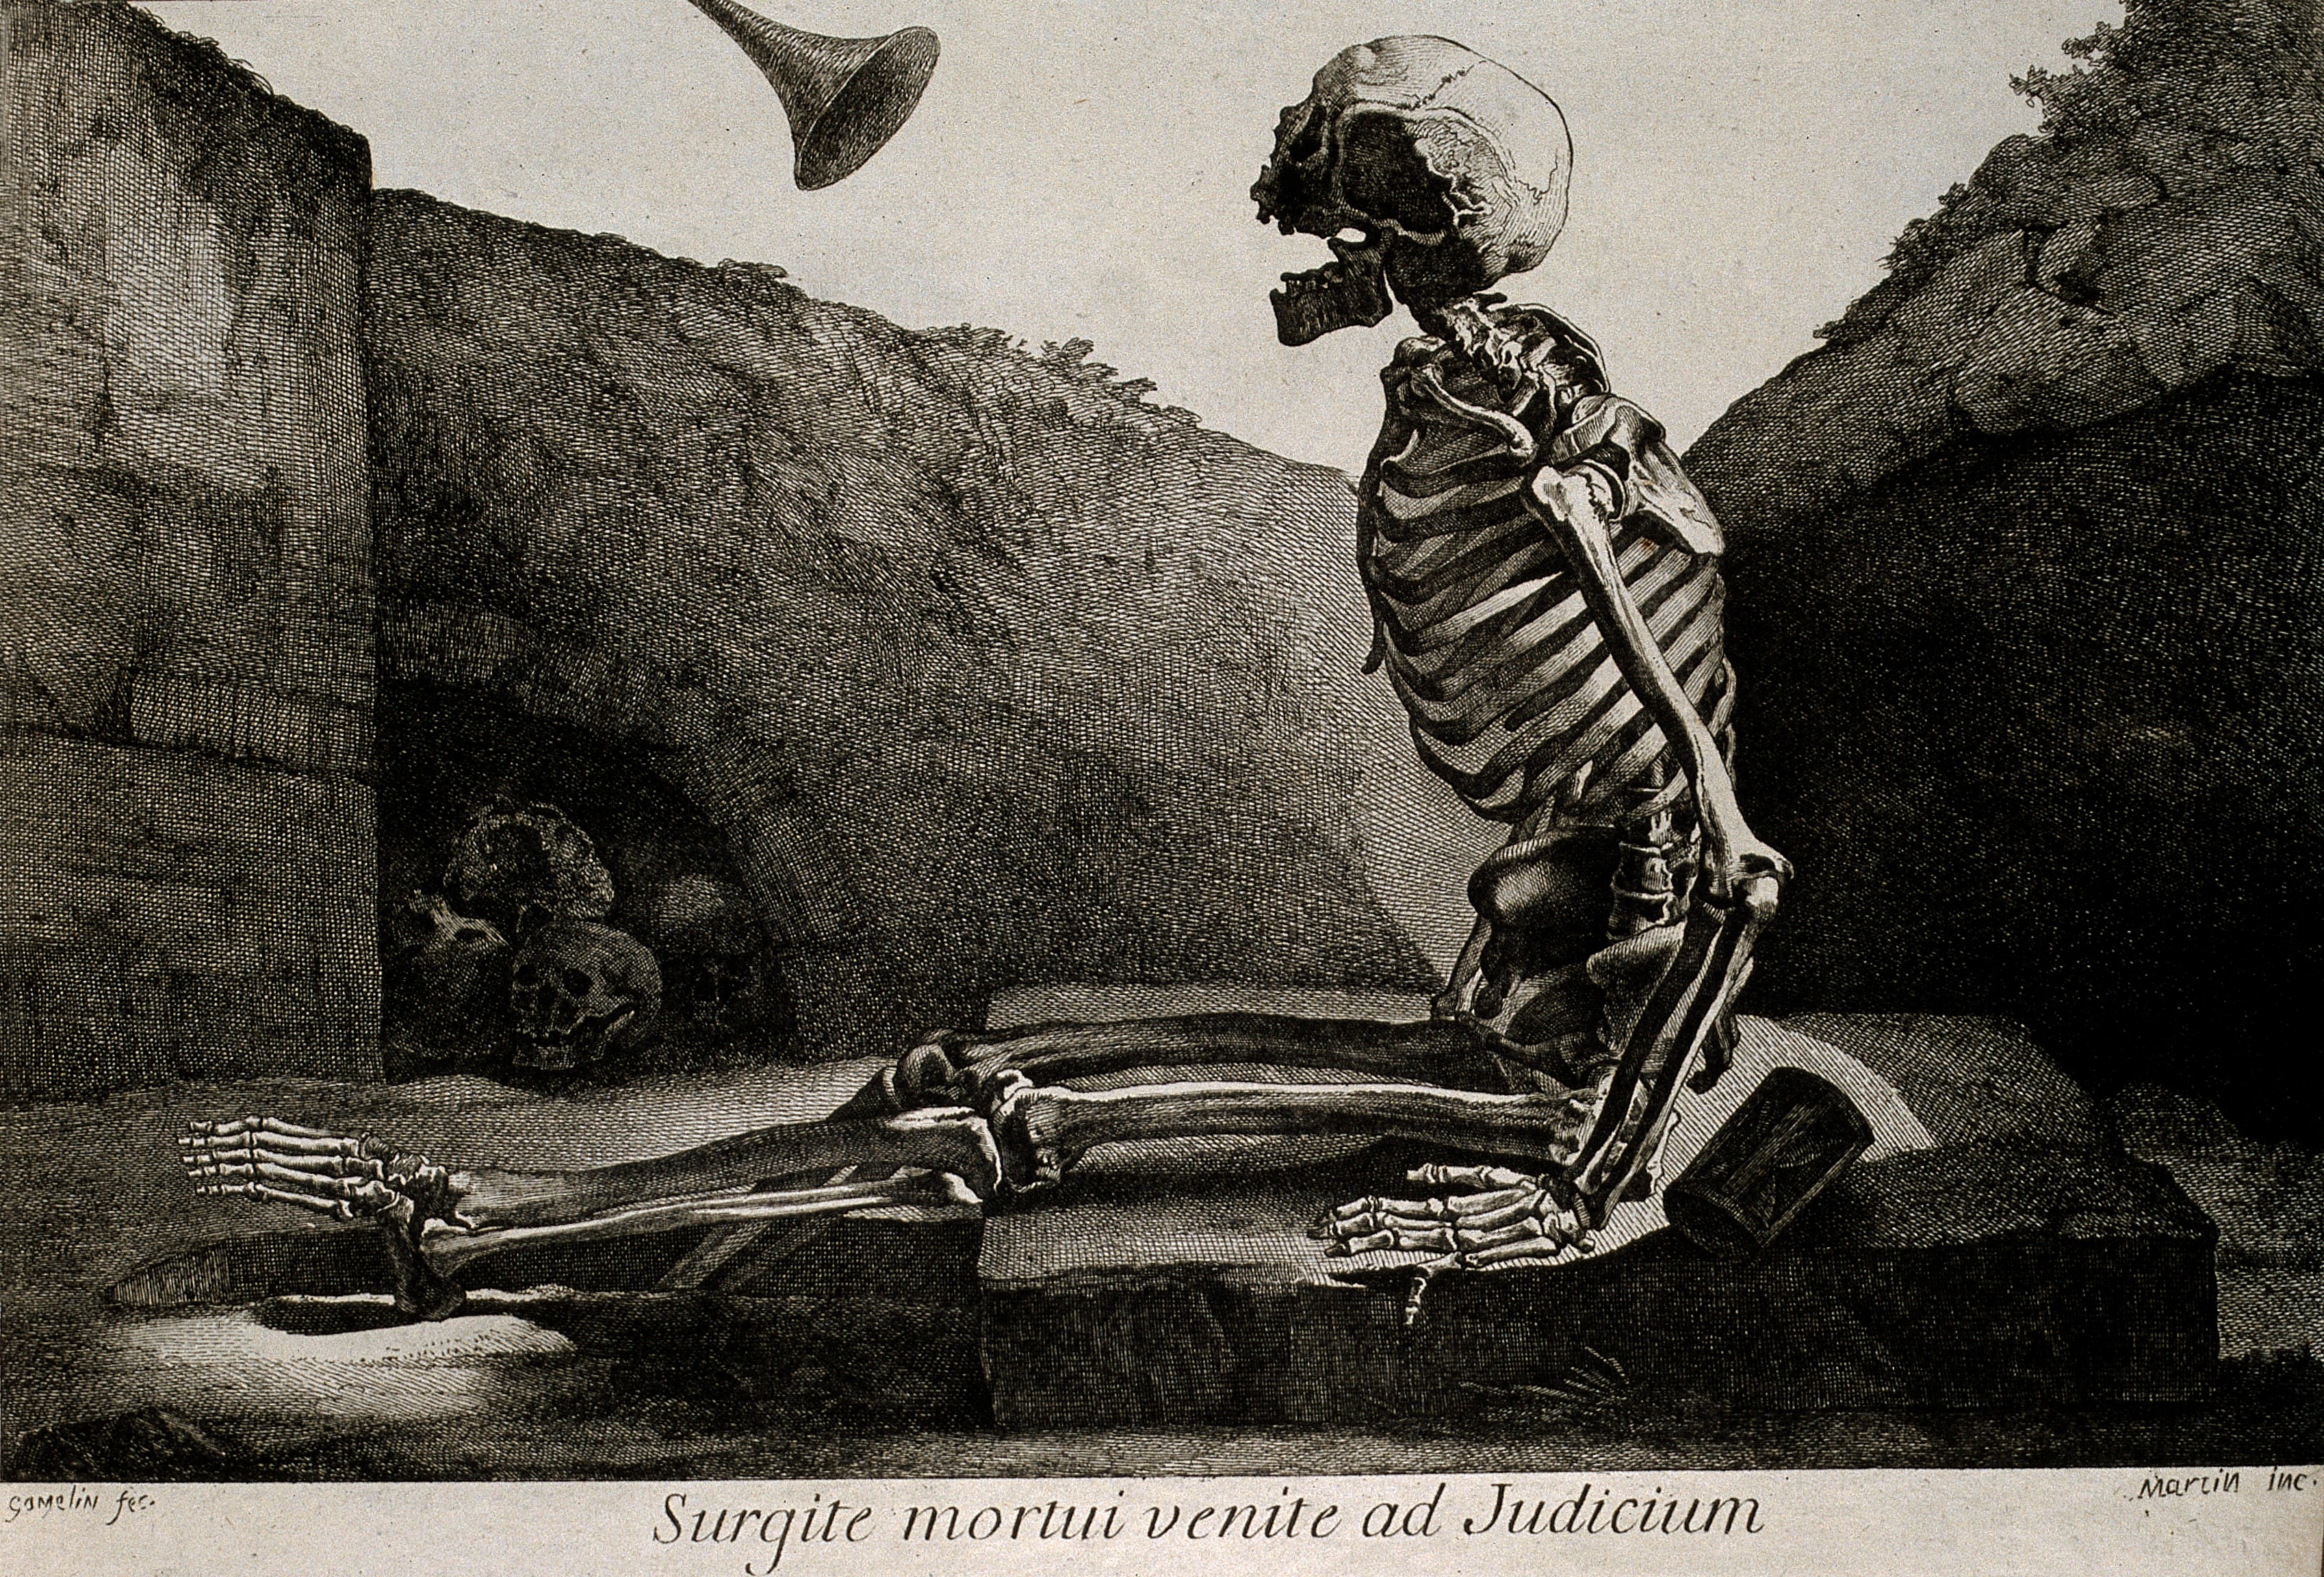 V0008801 A skeleton, seated on his grave, awakes to the last trump Credit: Wellcome Library, London. Wellcome Images images@wellcome.ac.uk http://wellcomeimages.org A skeleton Crayon 1779 By: Jacques Gamelinafter: nameGamelin, Jacques Nouveau recueil d'ostéologie et de myologie Nouveau recueil d'ostéologie et de myologie. Jacques Gamelin Published: 1779] Copyrighted work available under Creative Commons Attribution only licence CC BY 4.0 http://creativecommons.org/licenses/by/4.0/